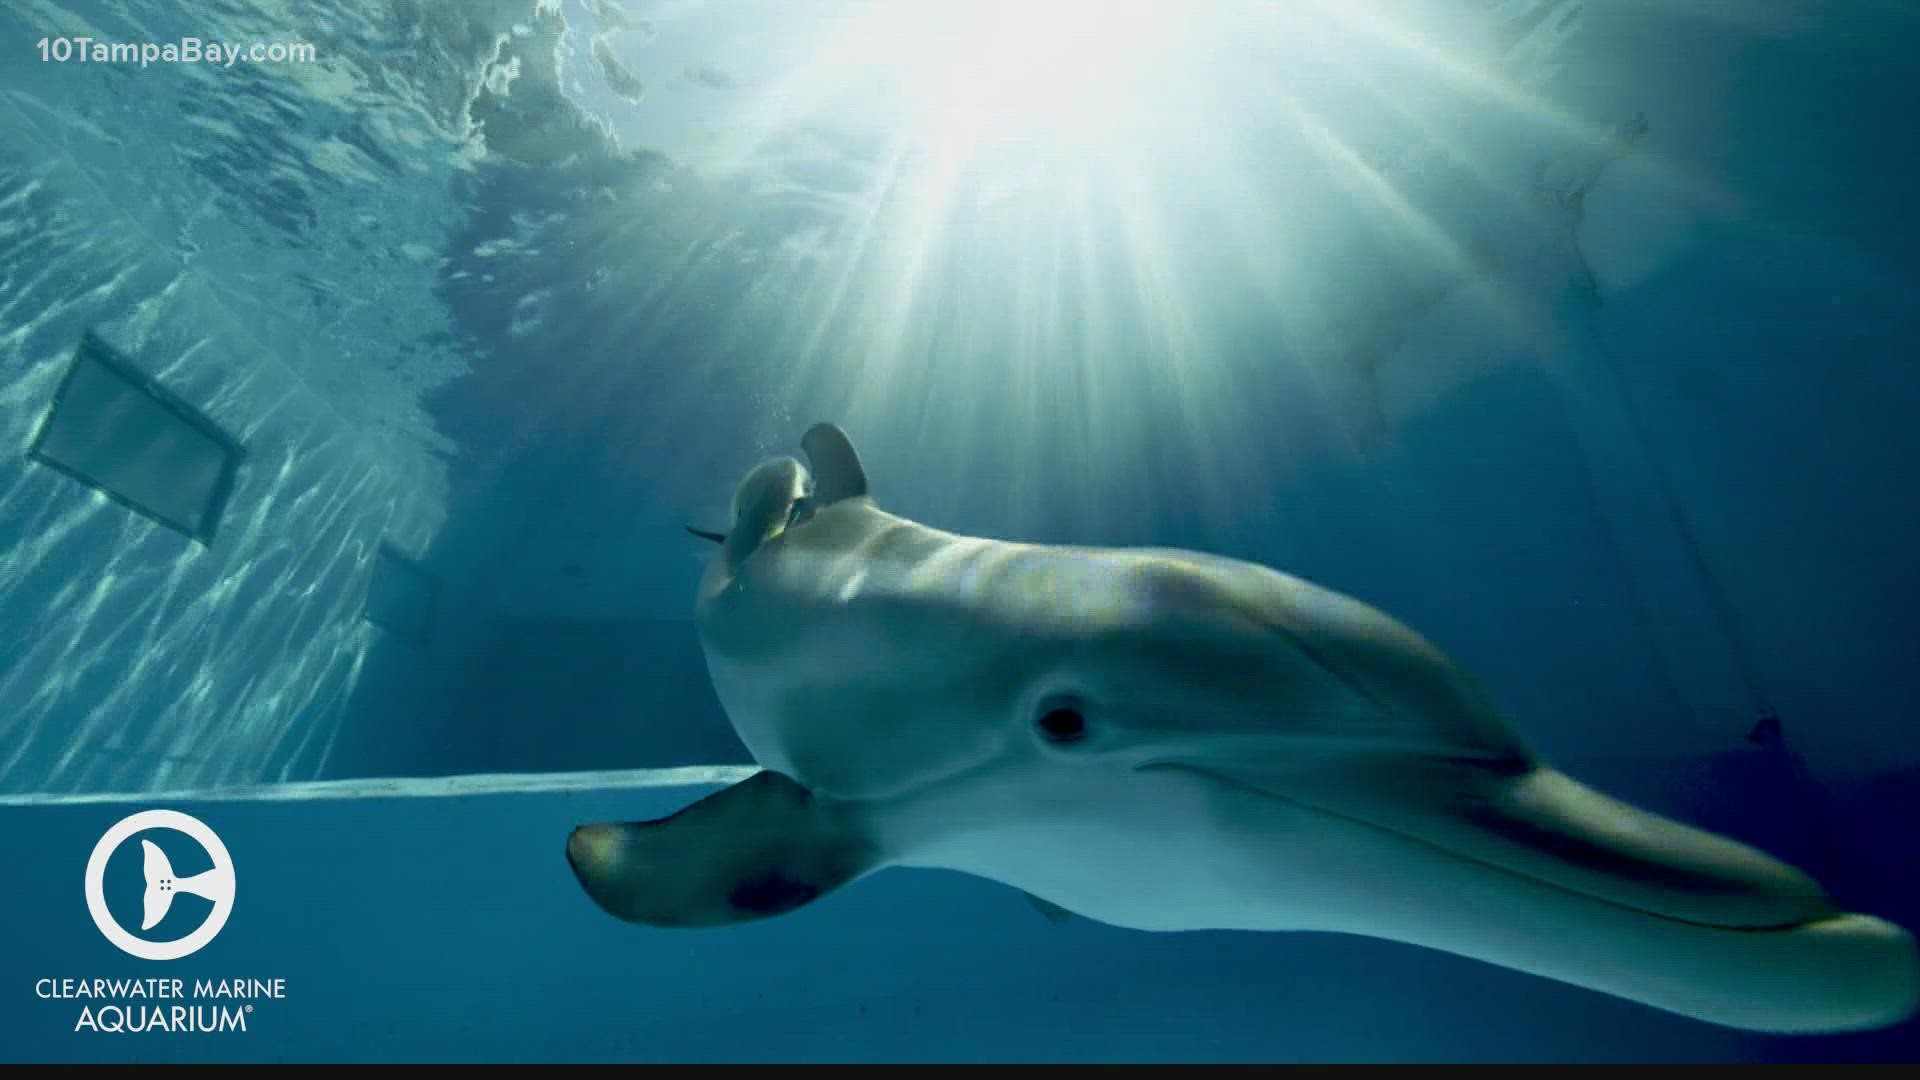 Dolphin Tale star Winter, whose story inspired millions, died on Thursday. She was 16,